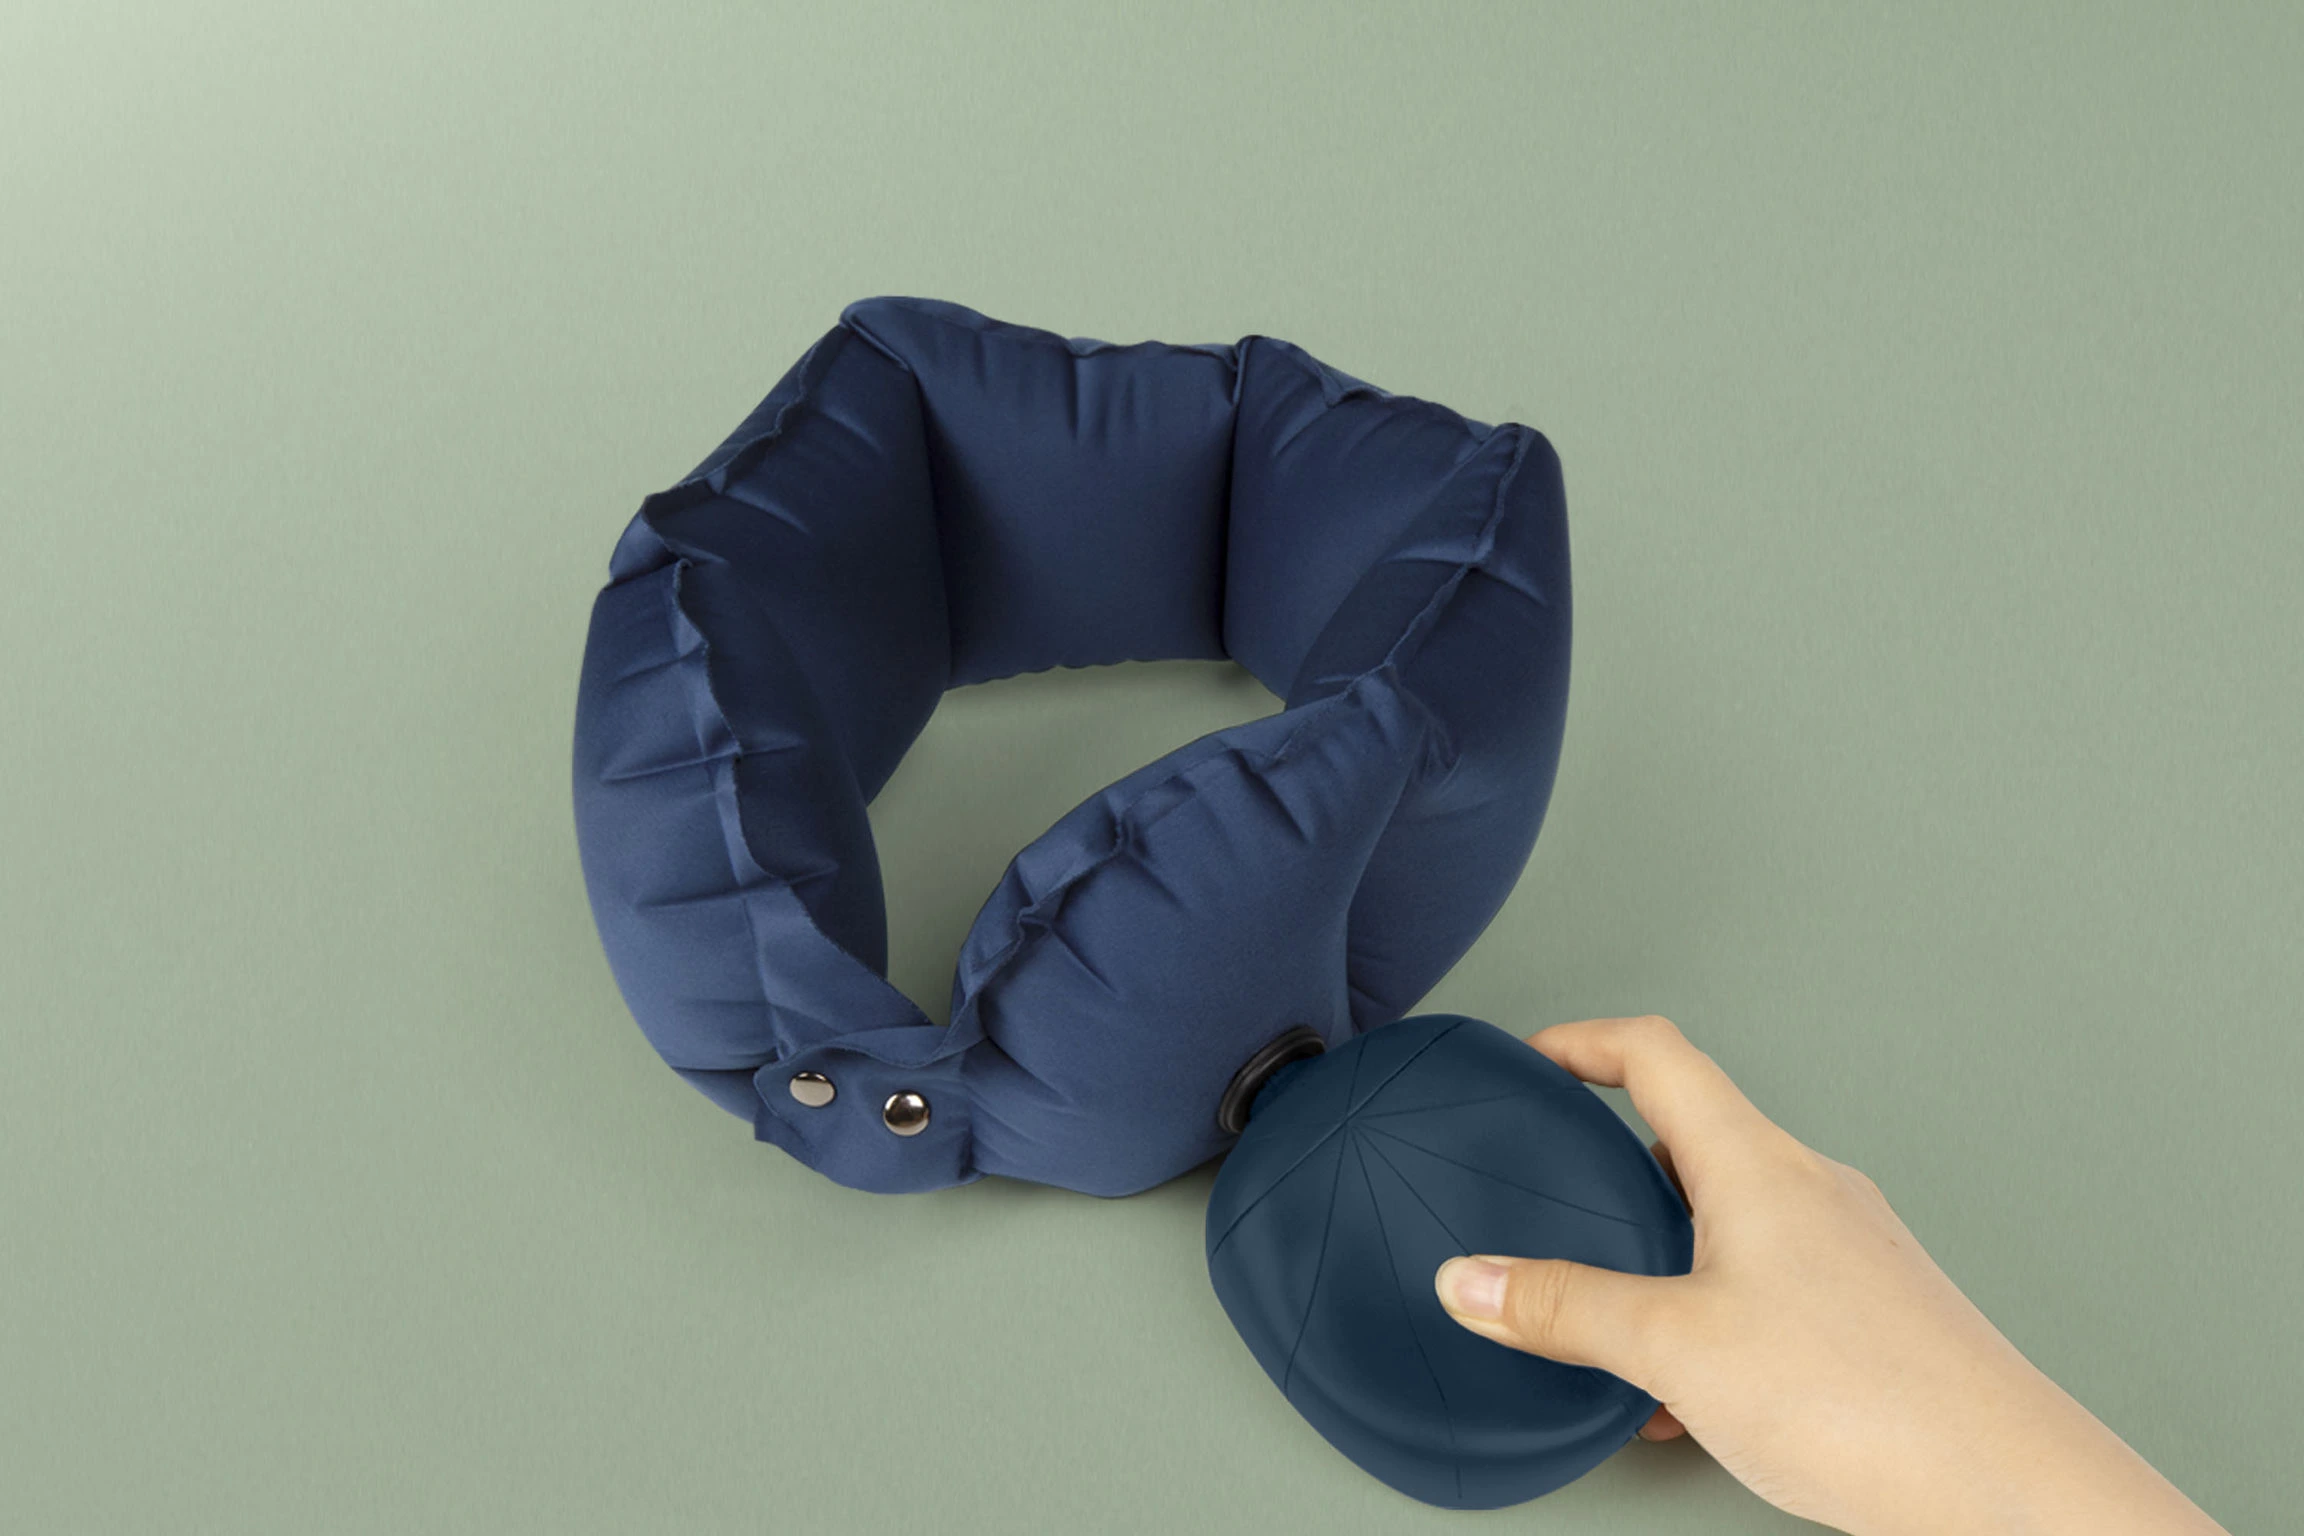 2023’s Diamond – Best of Show winner, the Neck Pillow by Urban Forest